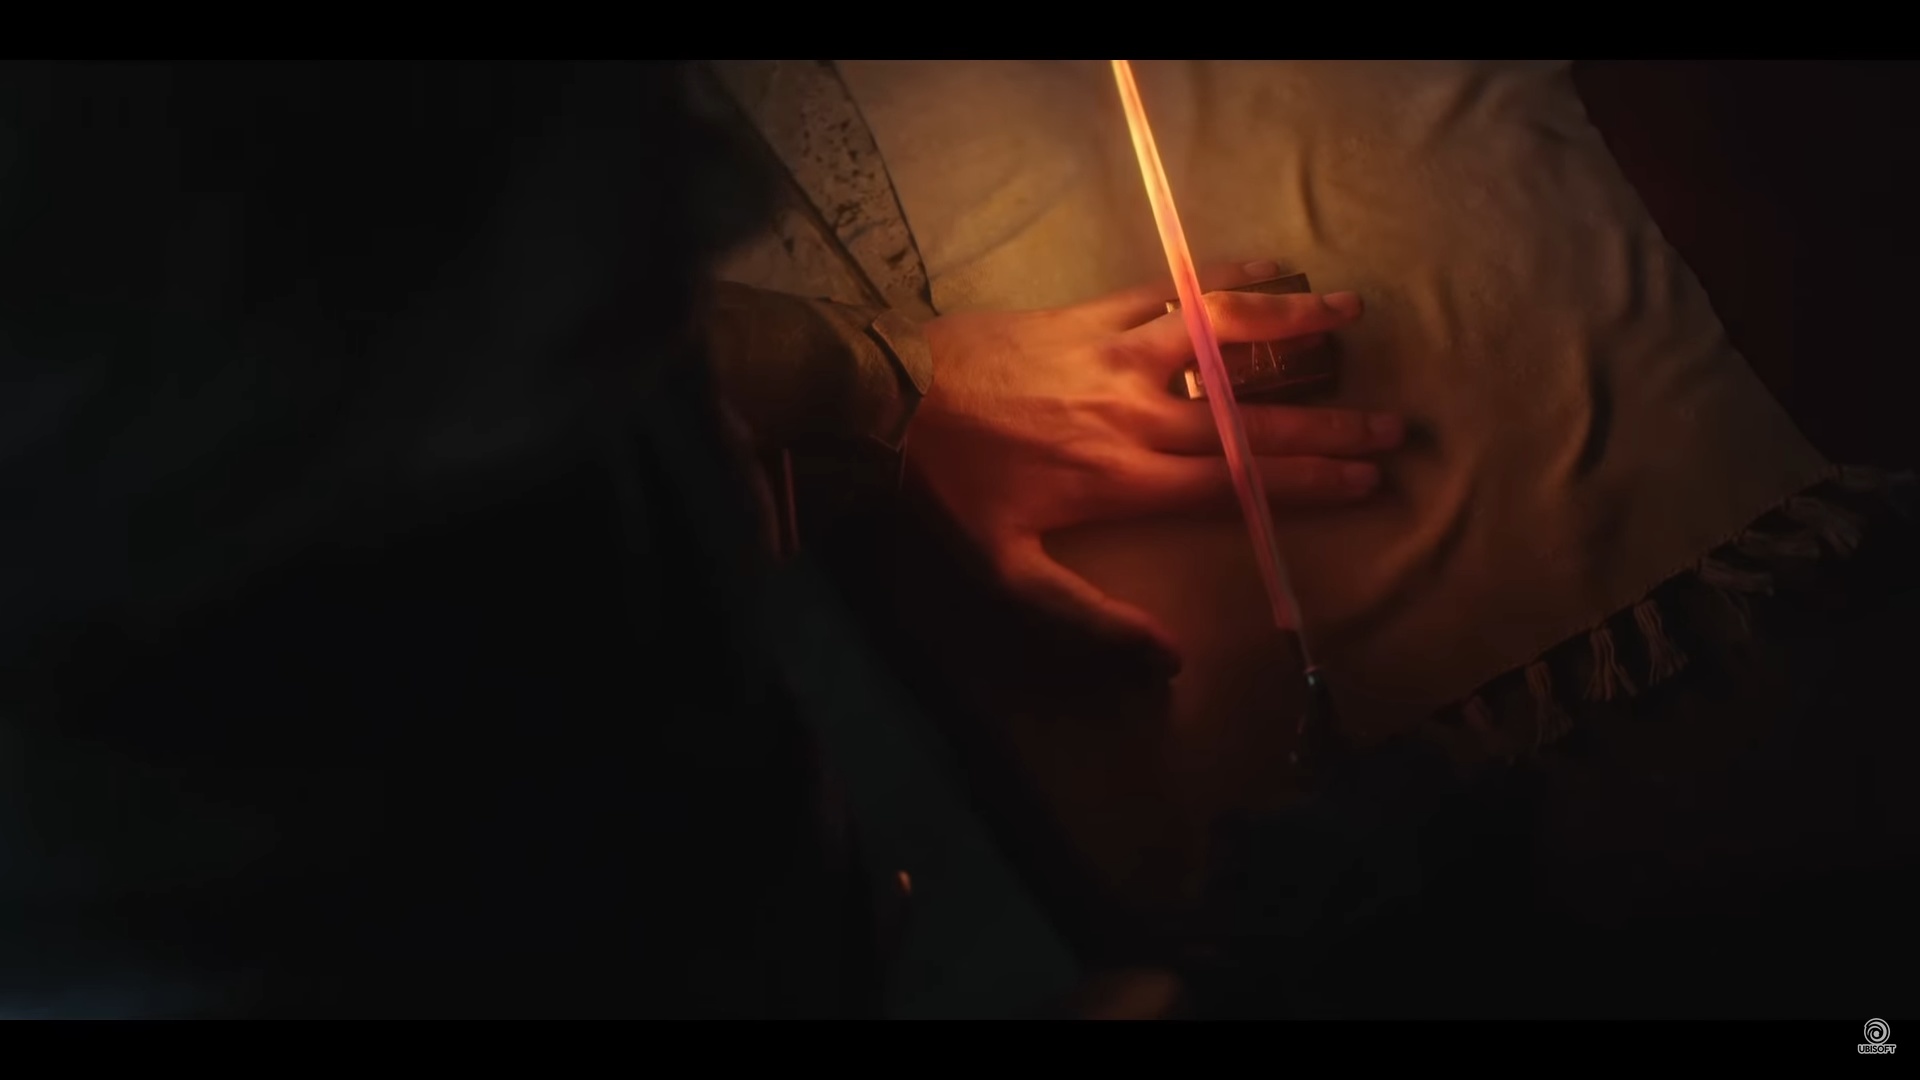 (In the trailer for Mirage we see Basim's initiation rite. The painful loss of the finger sets potentially devastating events in motion.)